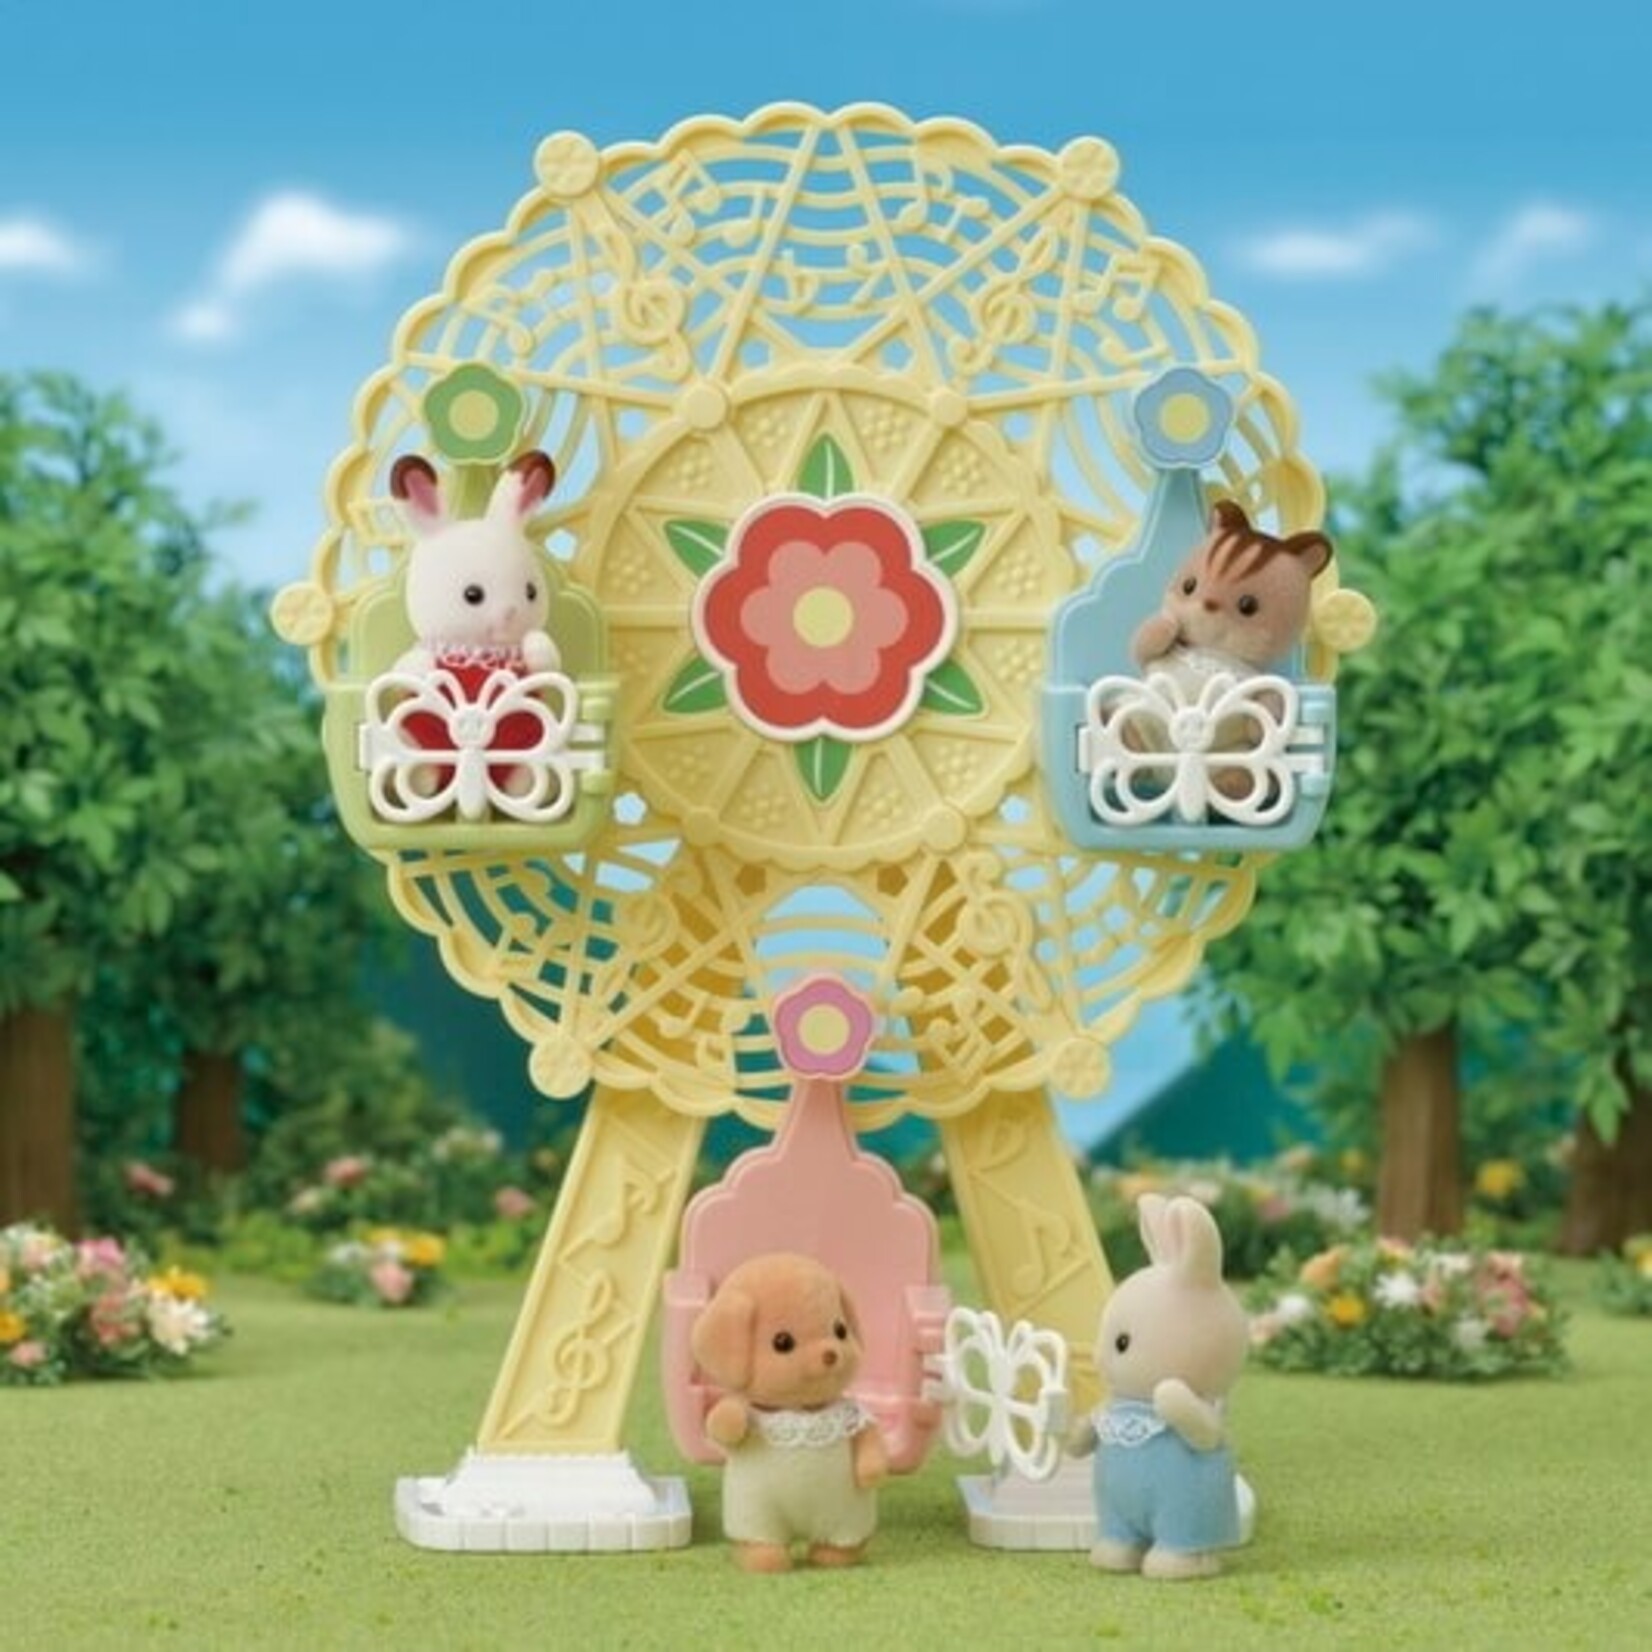 Calico Critters Calico Critters Baby Ferris Wheel Set